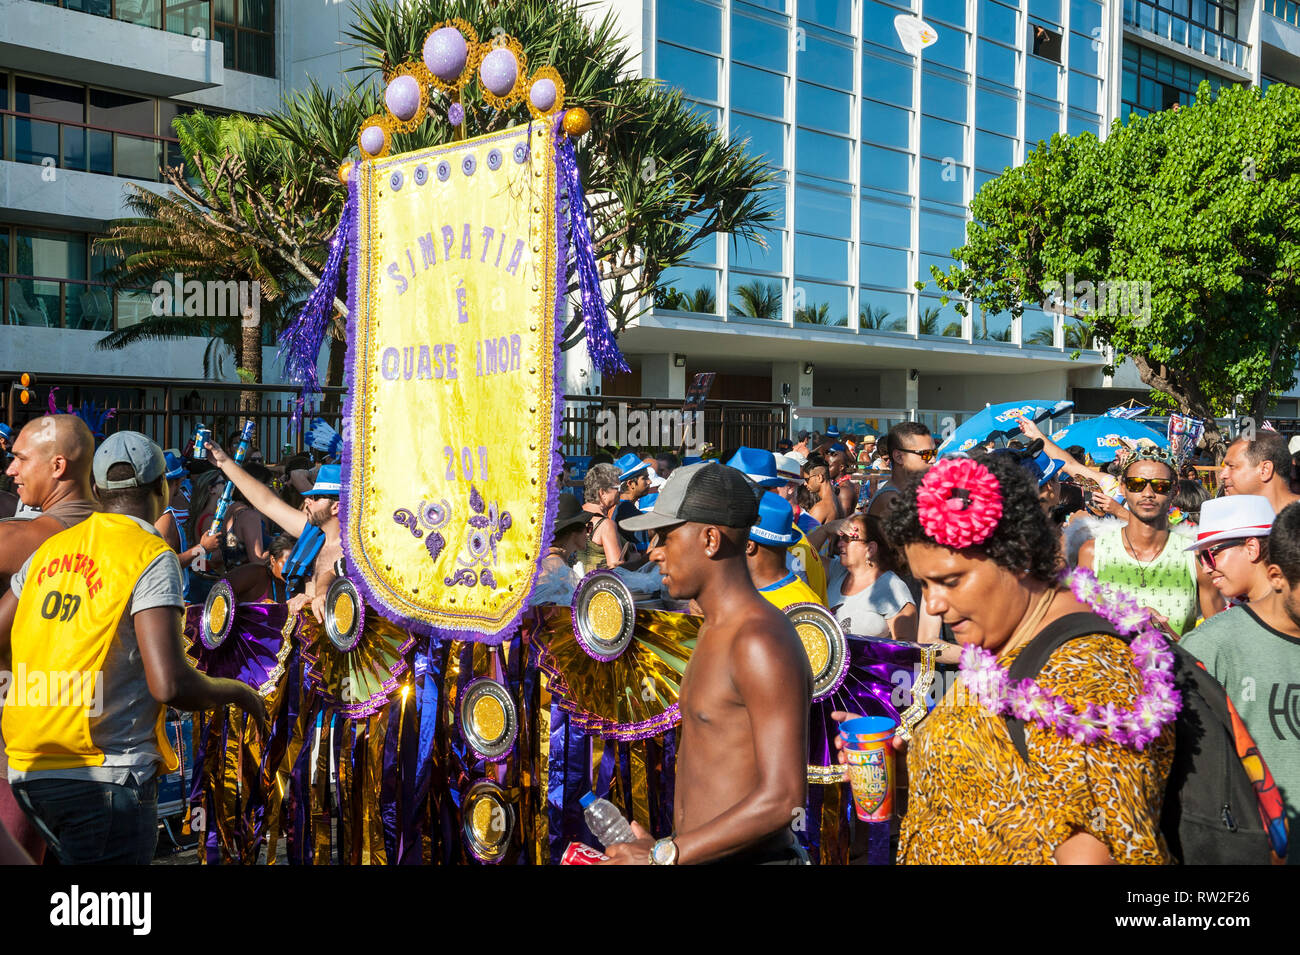 RIO DE JANEIRO - FEBRUARY 18, 2017: Brazilian carnivalgoers crowd the start of the Simpatia é Quase Amor (Sympathy is Almost Love) Carnival party. Stock Photo